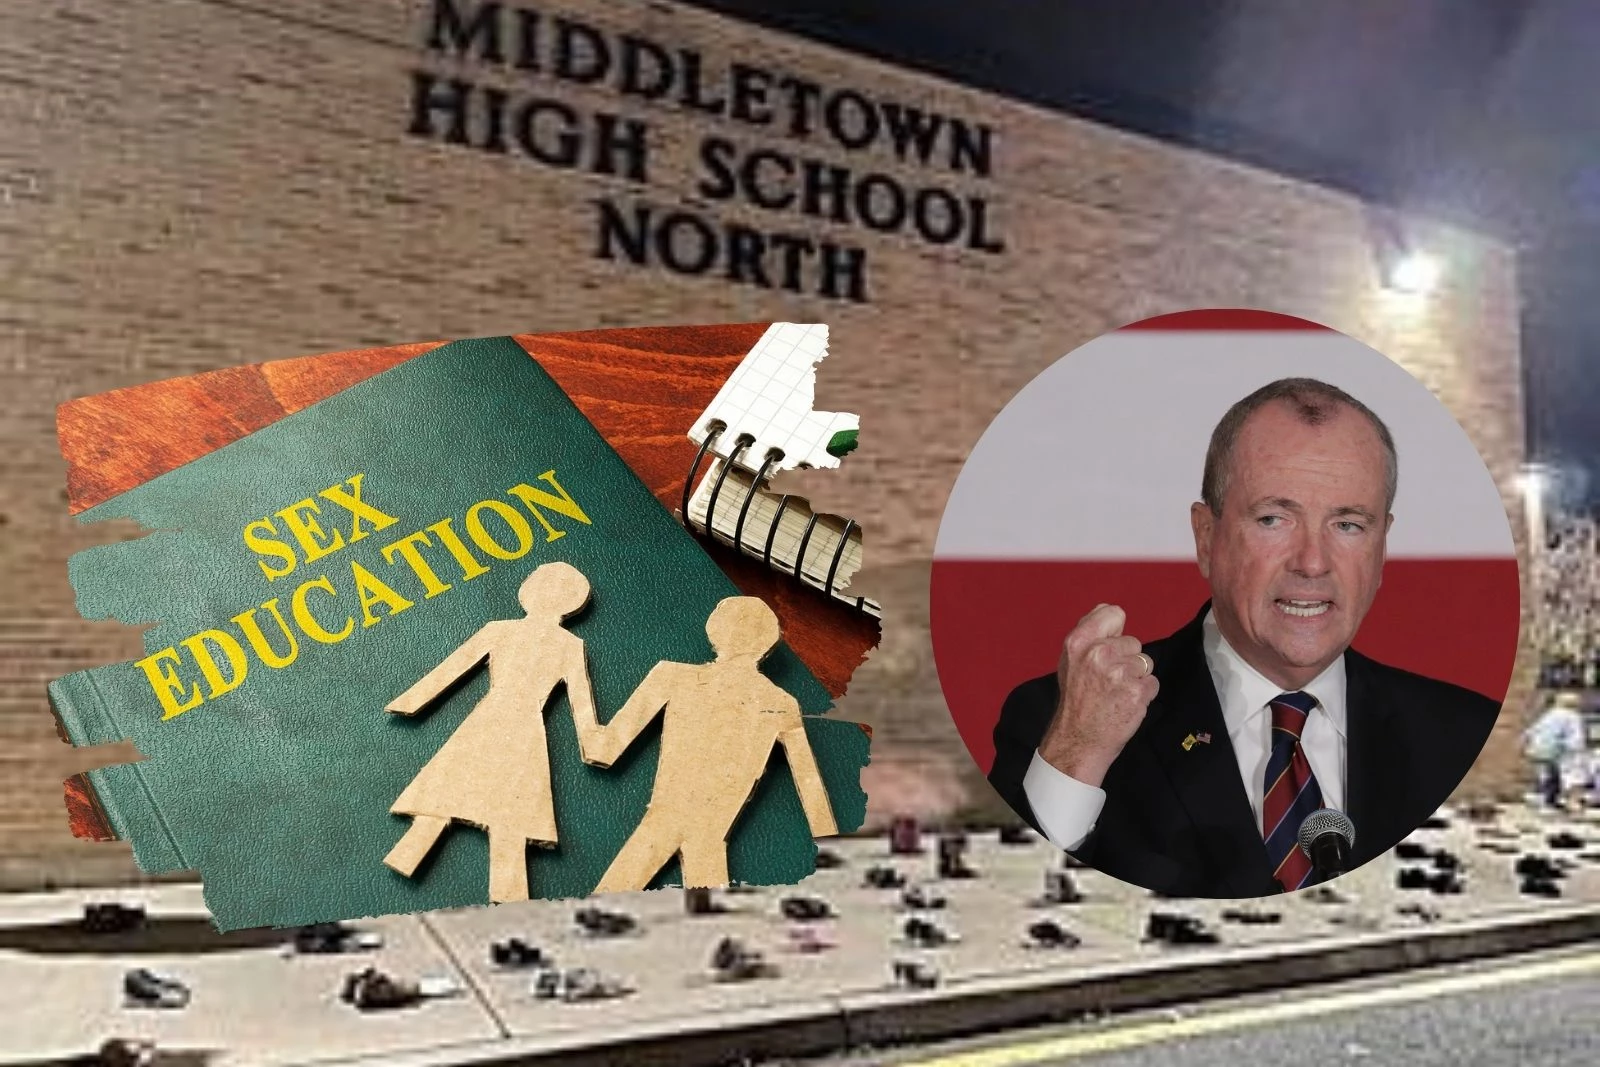 Middletown, NJ, schools to defy state